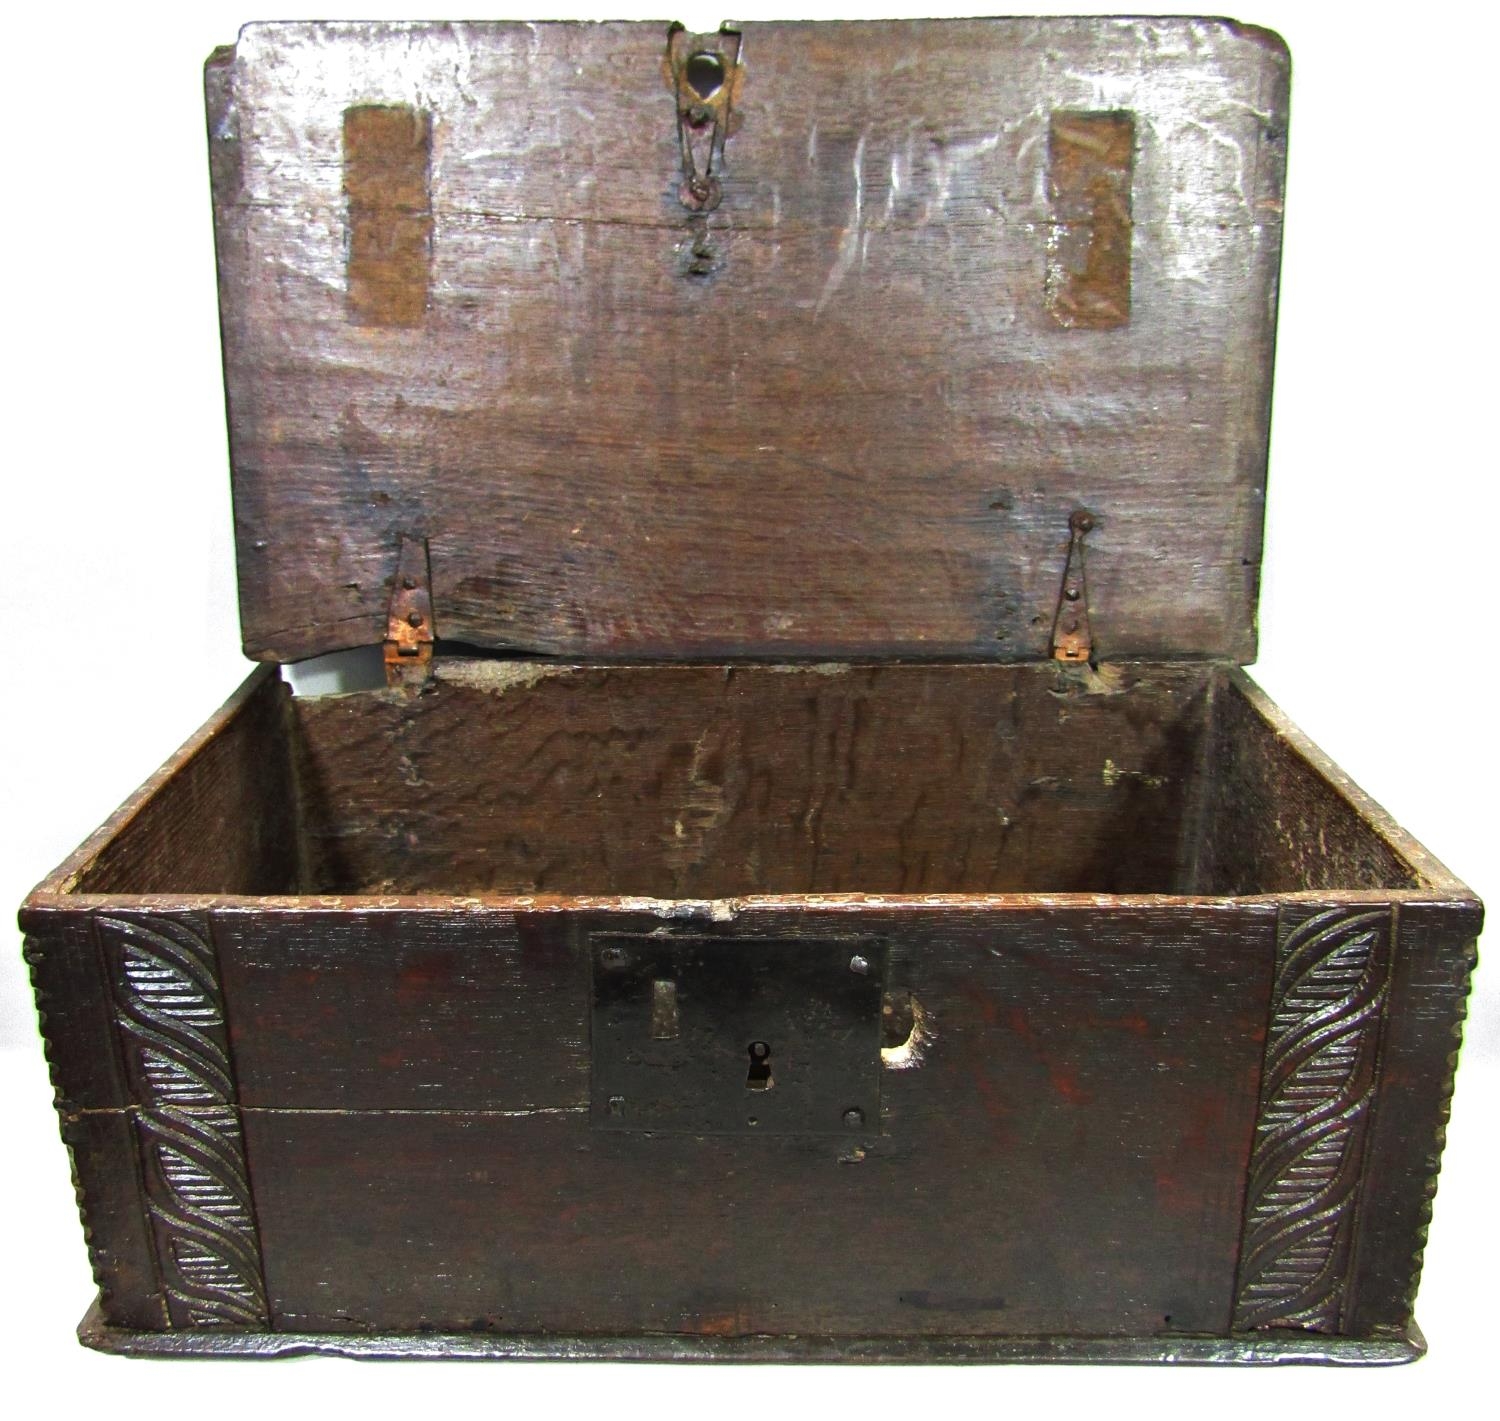 An 18th century oak bible box with steel lock plate with carved detail, a Japanese lacquered box - Image 2 of 5